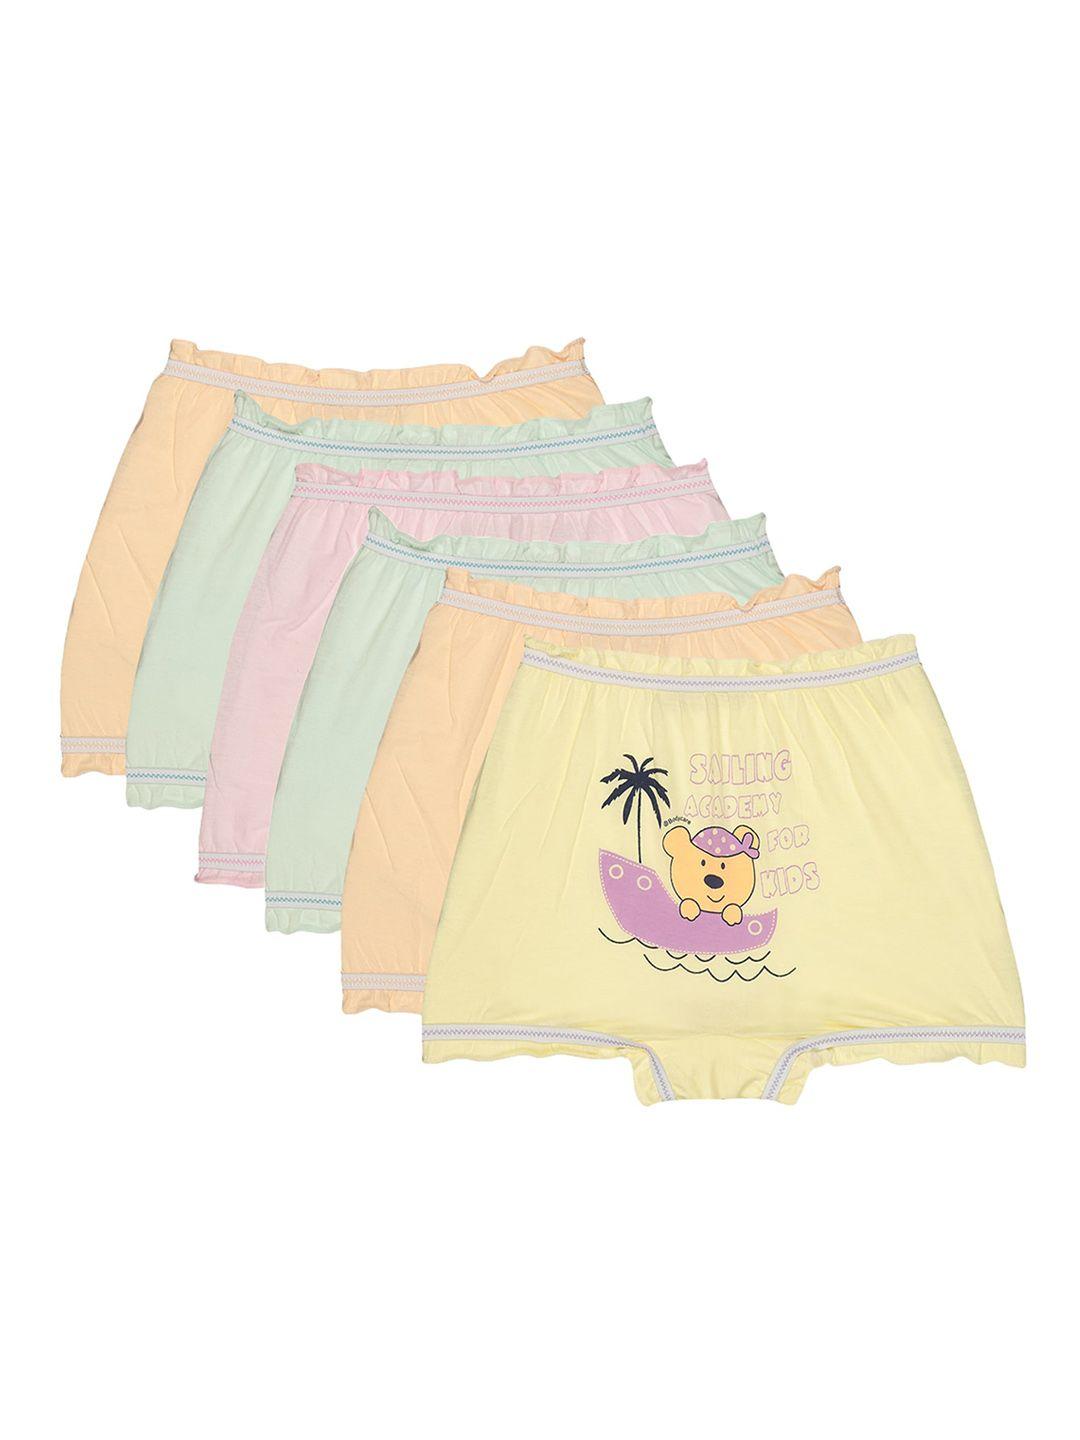 dyca kids pack of 6 assorted printed cotton boxer style briefs dia705-pk008_p6